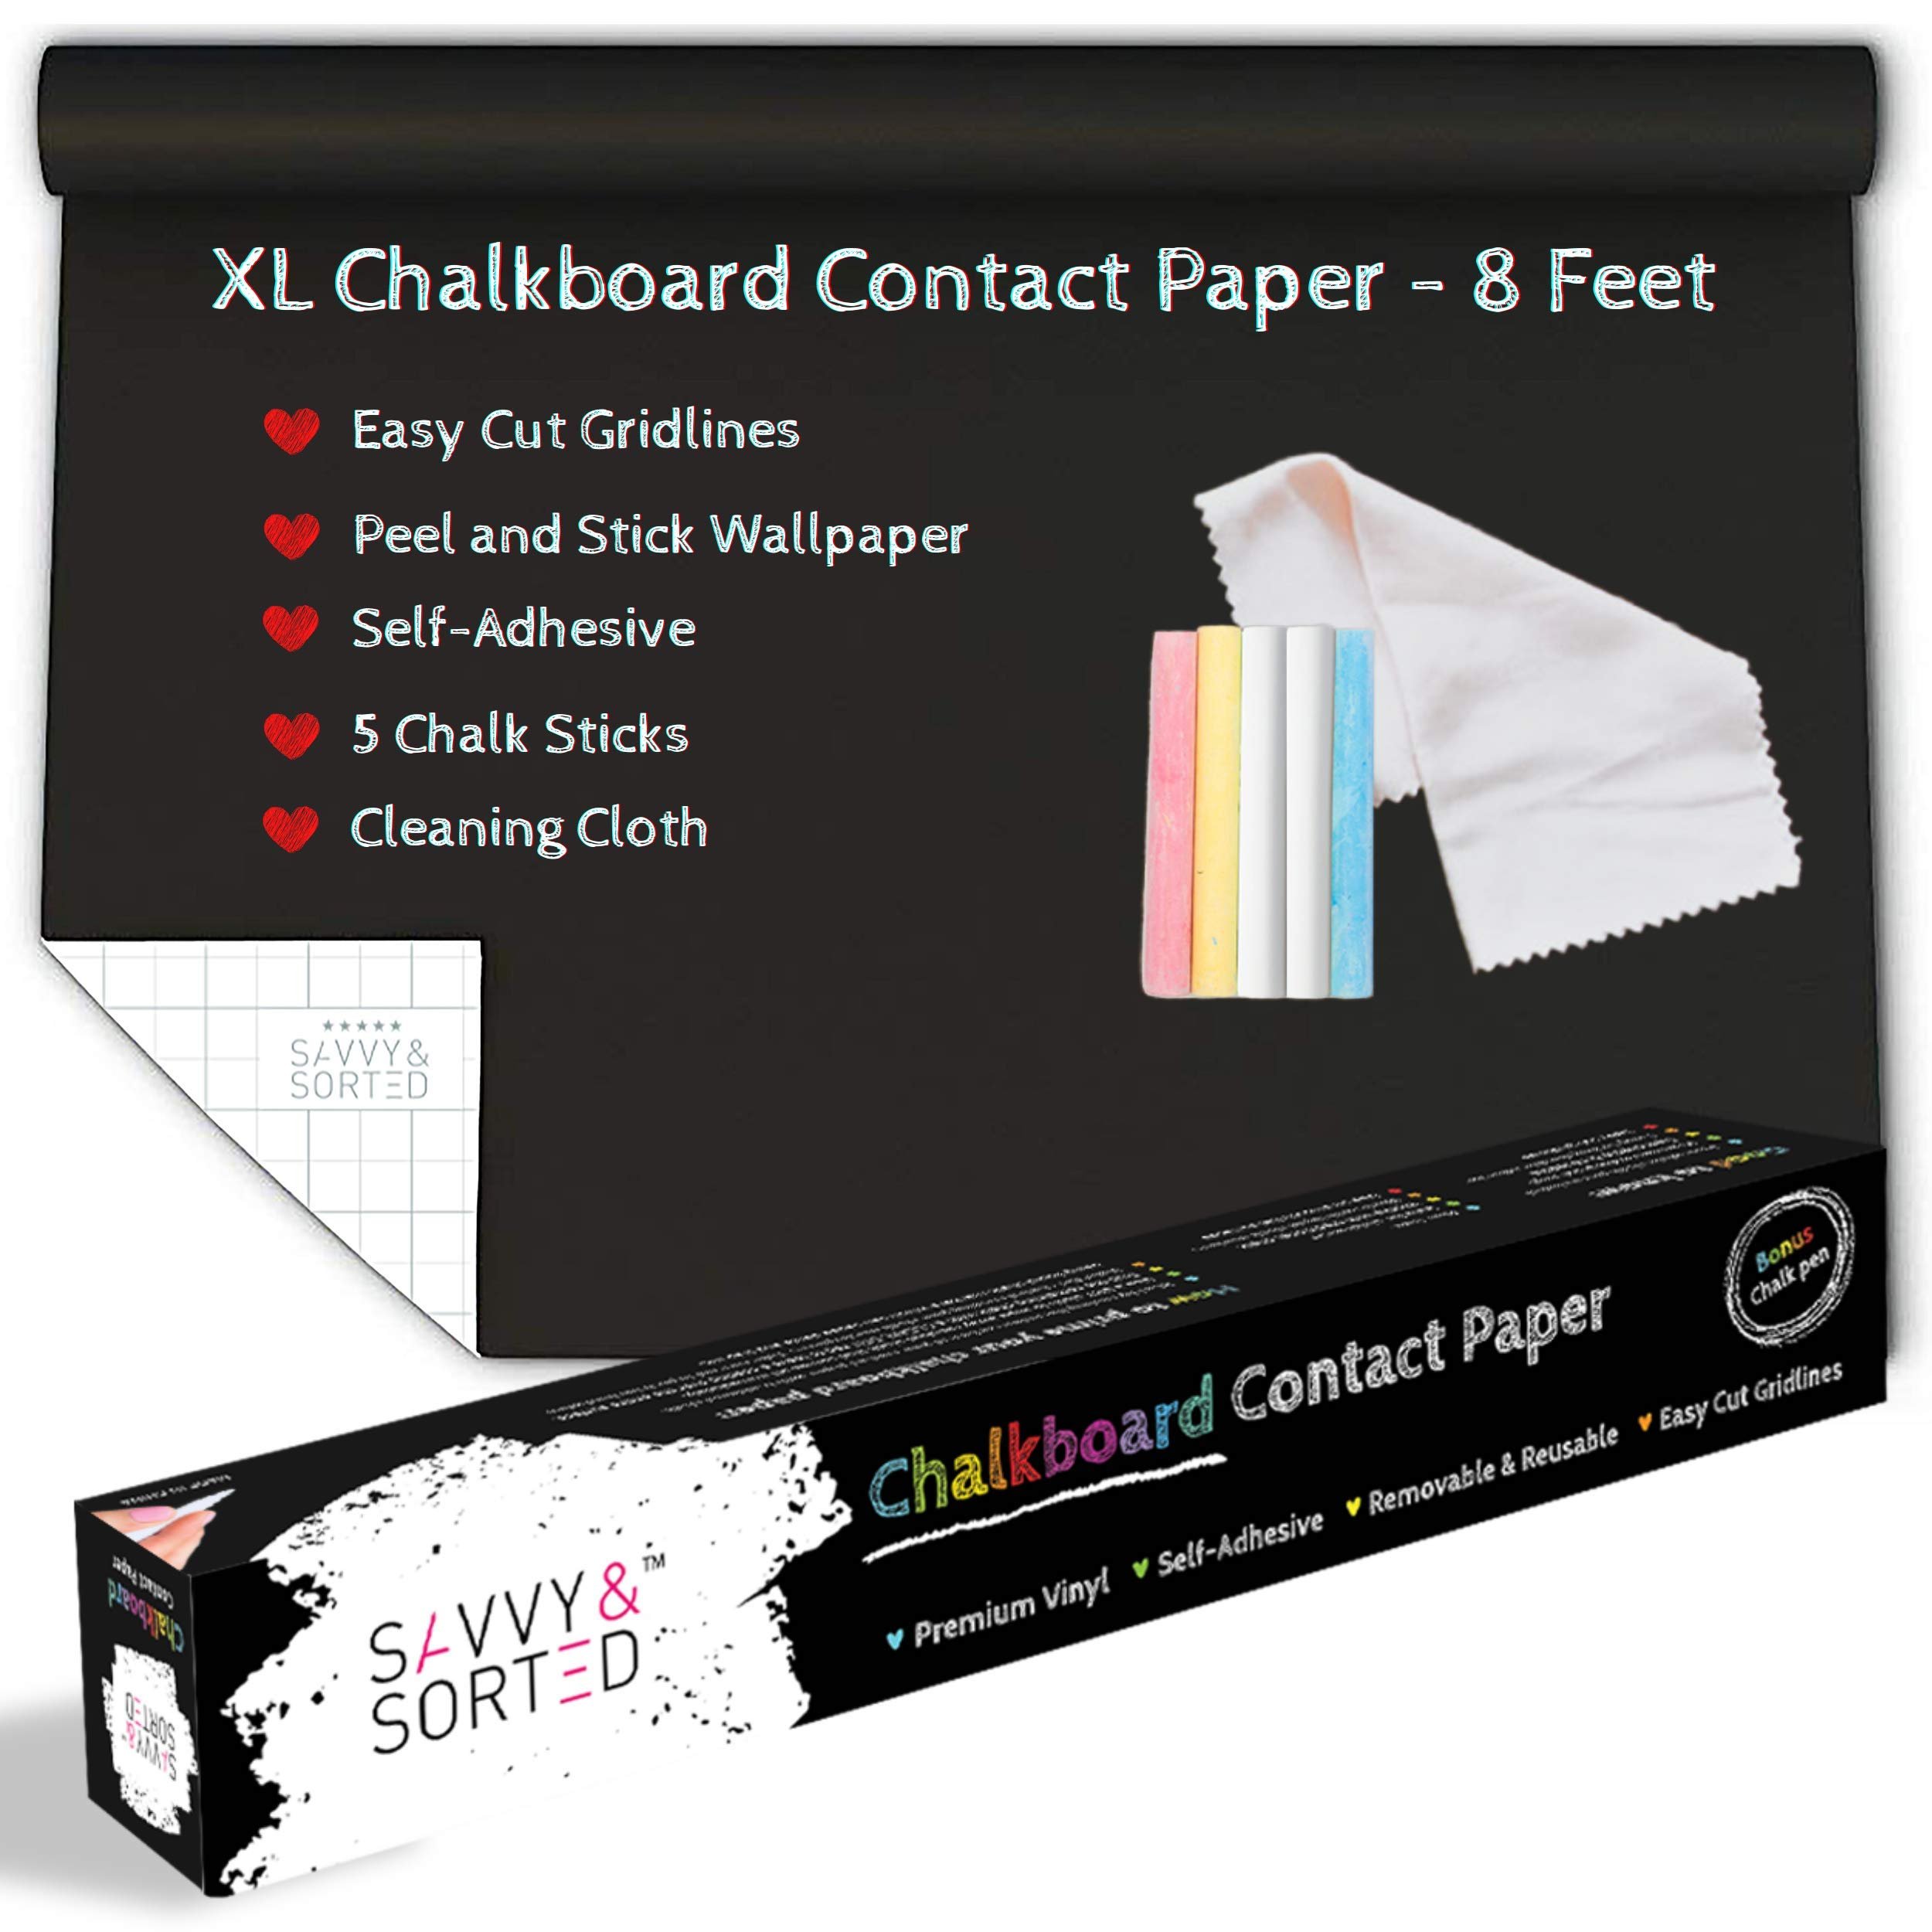 Book Cover SAVVY & SORTED Black Chalkboard Contact Paper 8 FT - XL Chalk Board Paper Roll Peel & Stick with Chalk Sticks - 17inW x 96inL - Removable Black Sticker Self Adhesive Wallpaper Blackboard Wall Decal